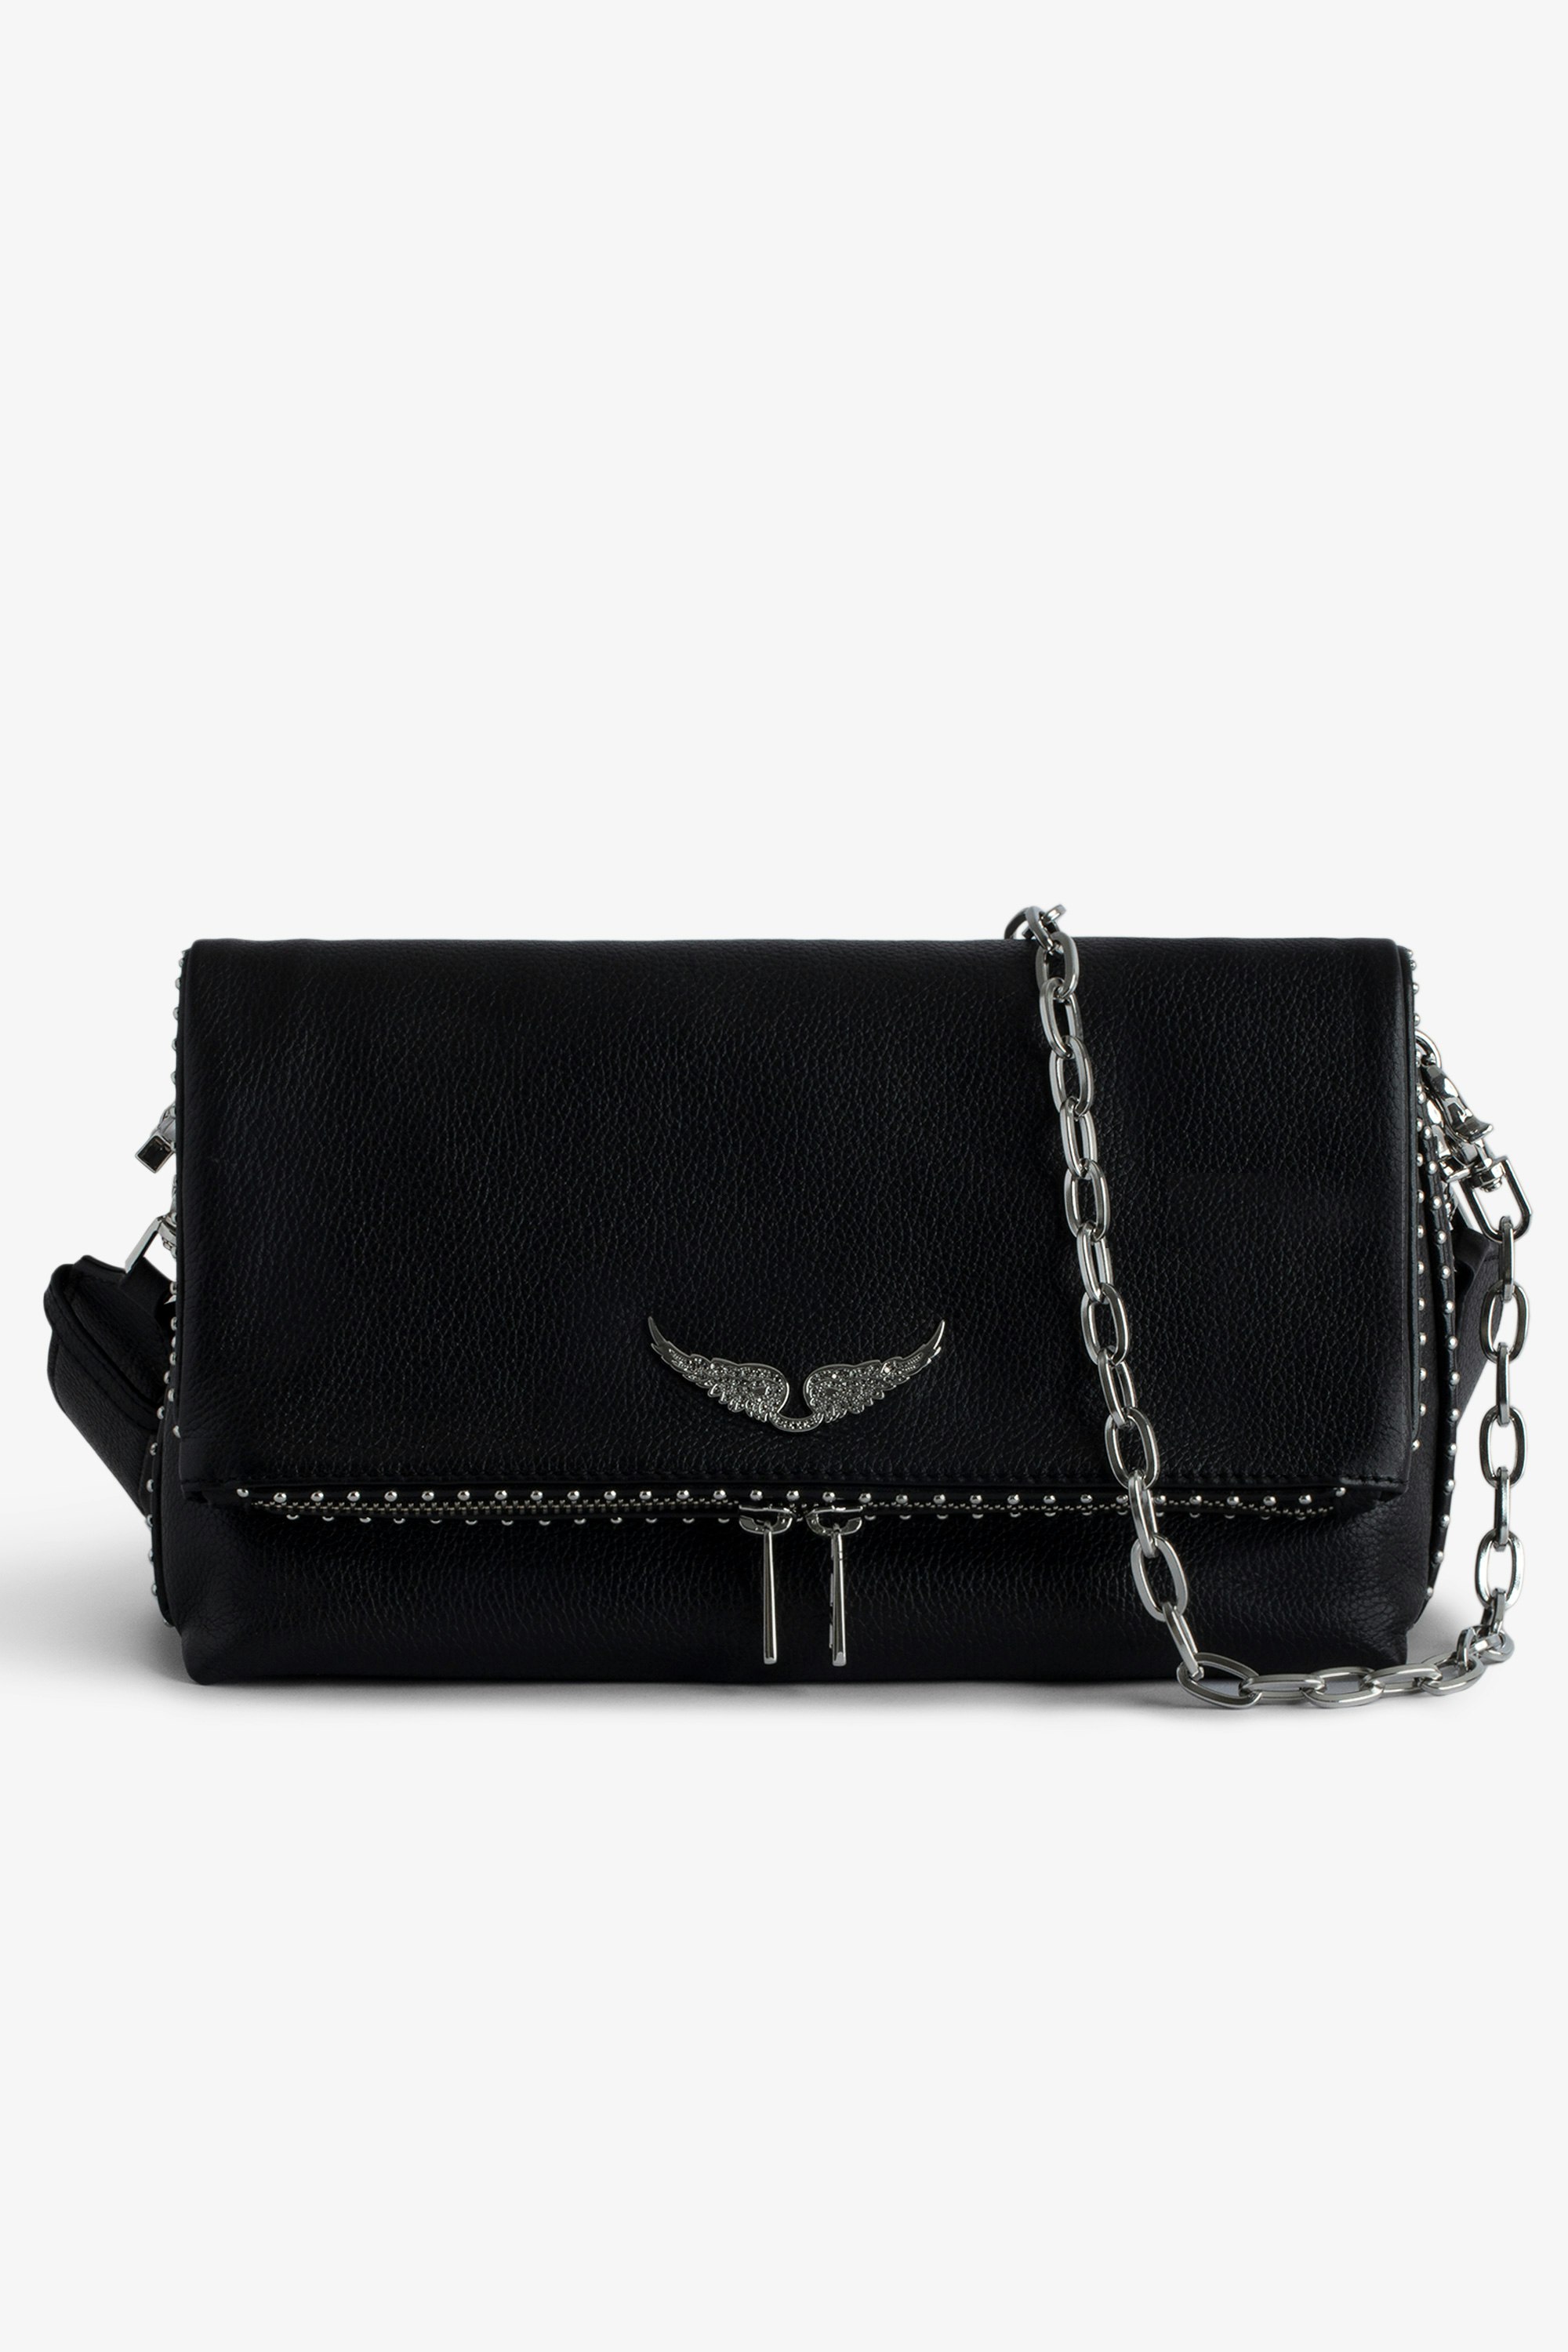 Rocky Studs バッグ Women’s black leather bag embellished with studs.